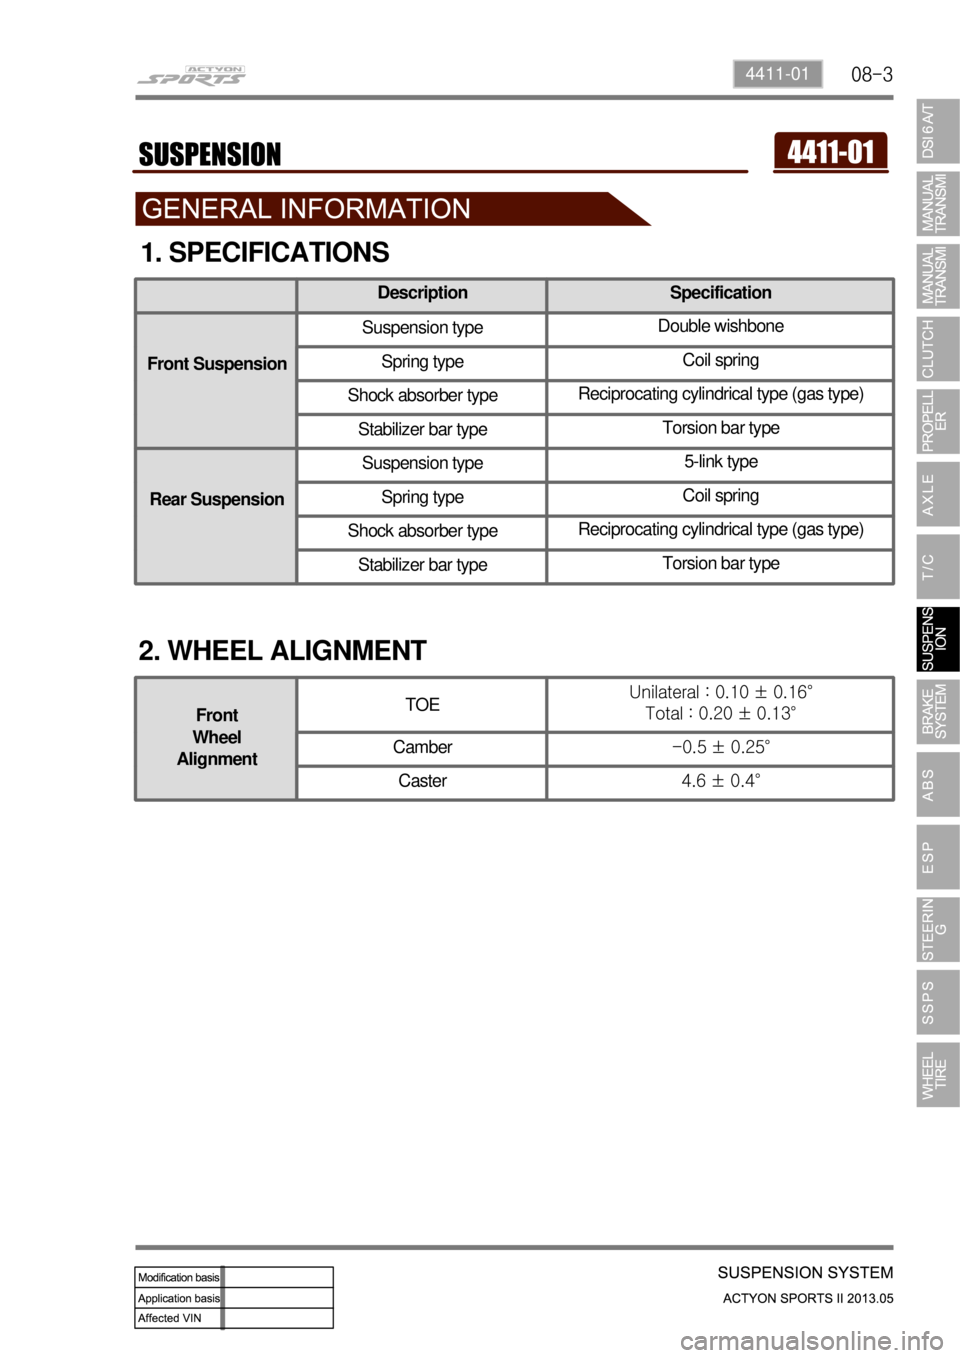 SSANGYONG NEW ACTYON SPORTS 2013  Service Manual 08-34411-01
1. SPECIFICATIONS
2. WHEEL ALIGNMENT
Description Specification
Front SuspensionSuspension typeDouble wishbone
Spring typeCoil spring
Shock absorber typeReciprocating cylindrical type (gas 